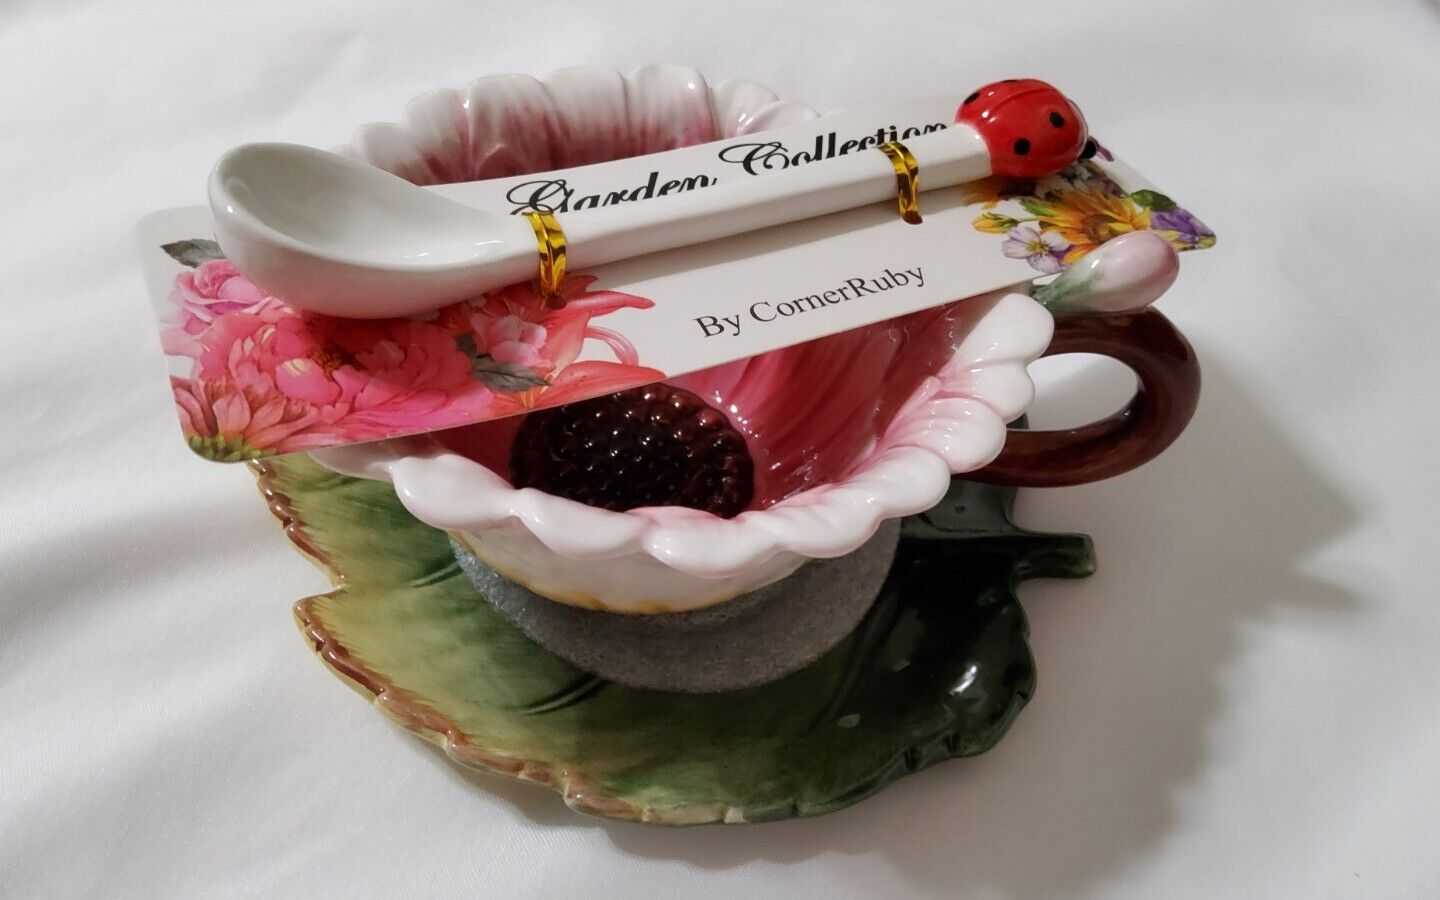 Corner Ruby Garden Collection Sunflower Cup and Leaf Saucer with Ladybug Spoon